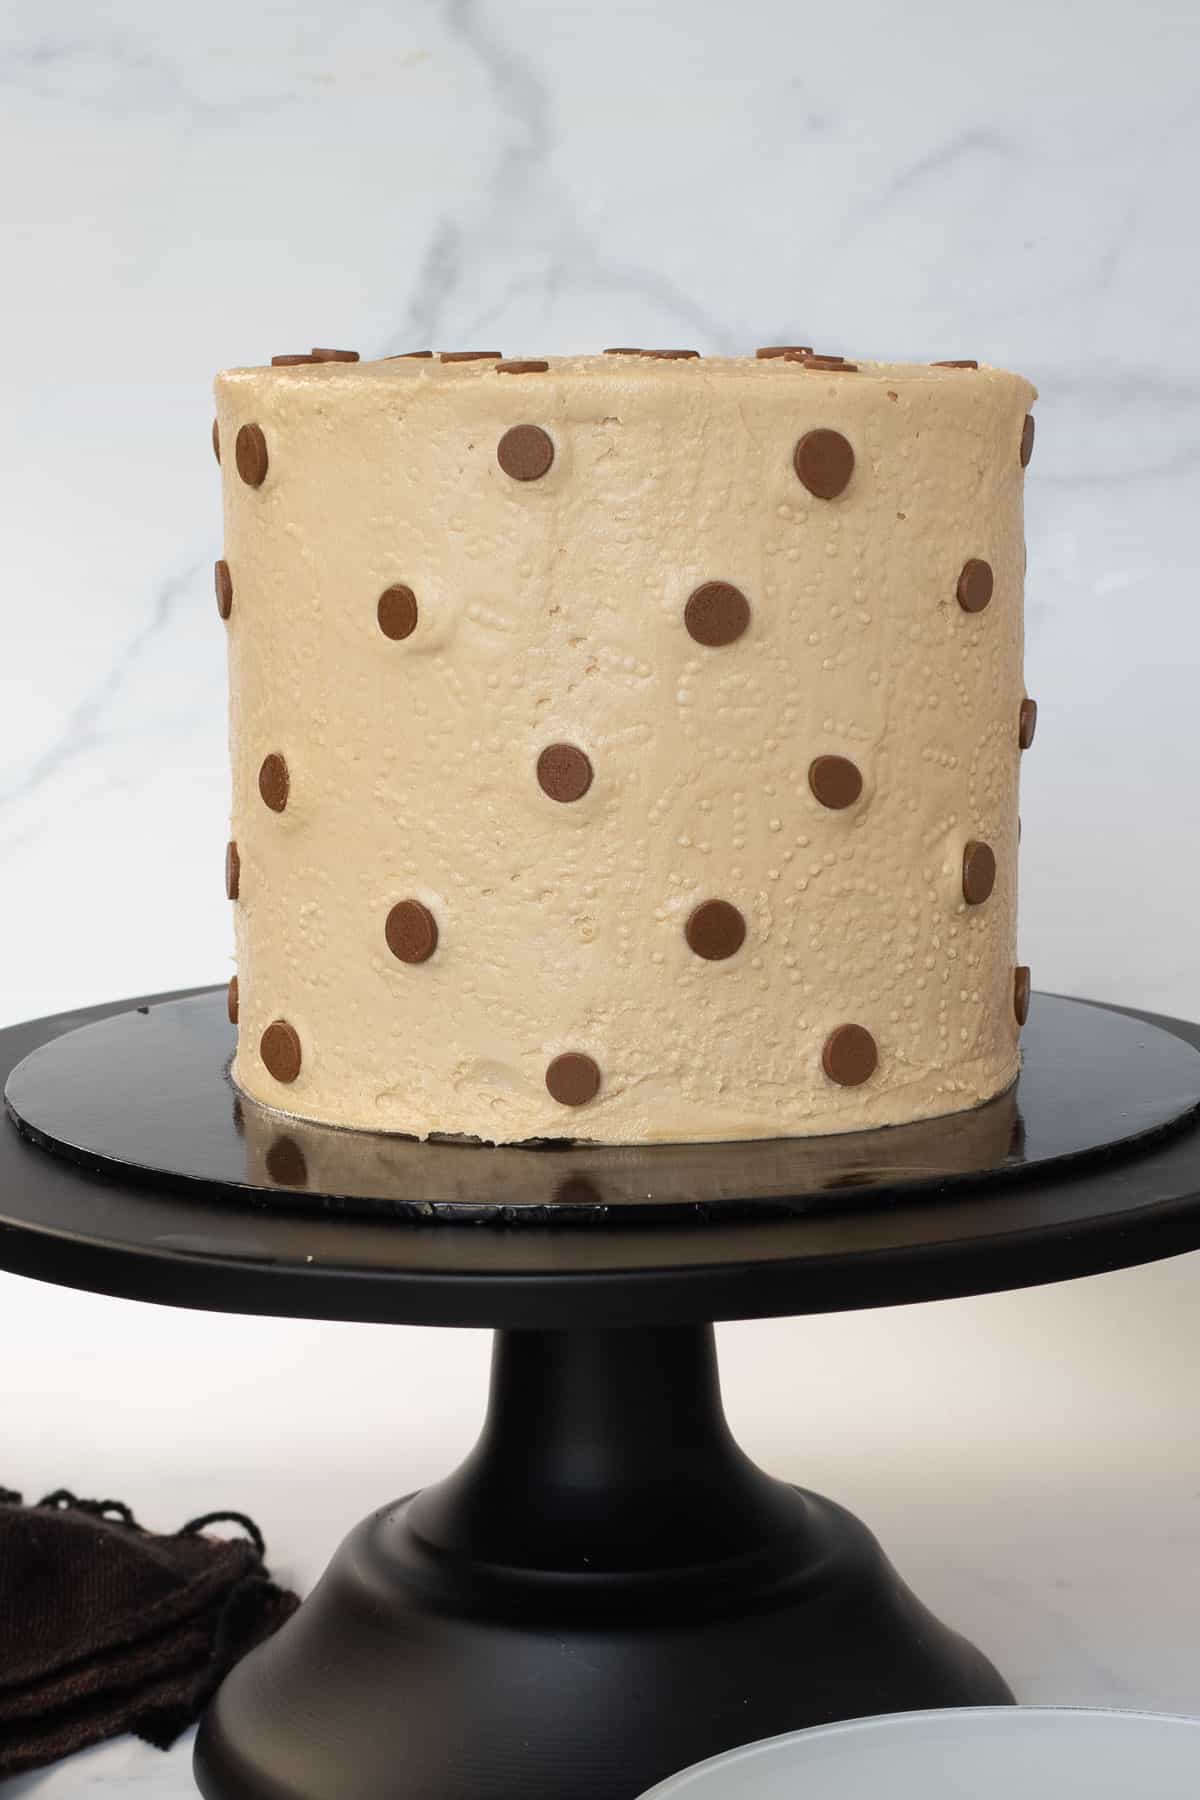 A round cake on a black cake stand.